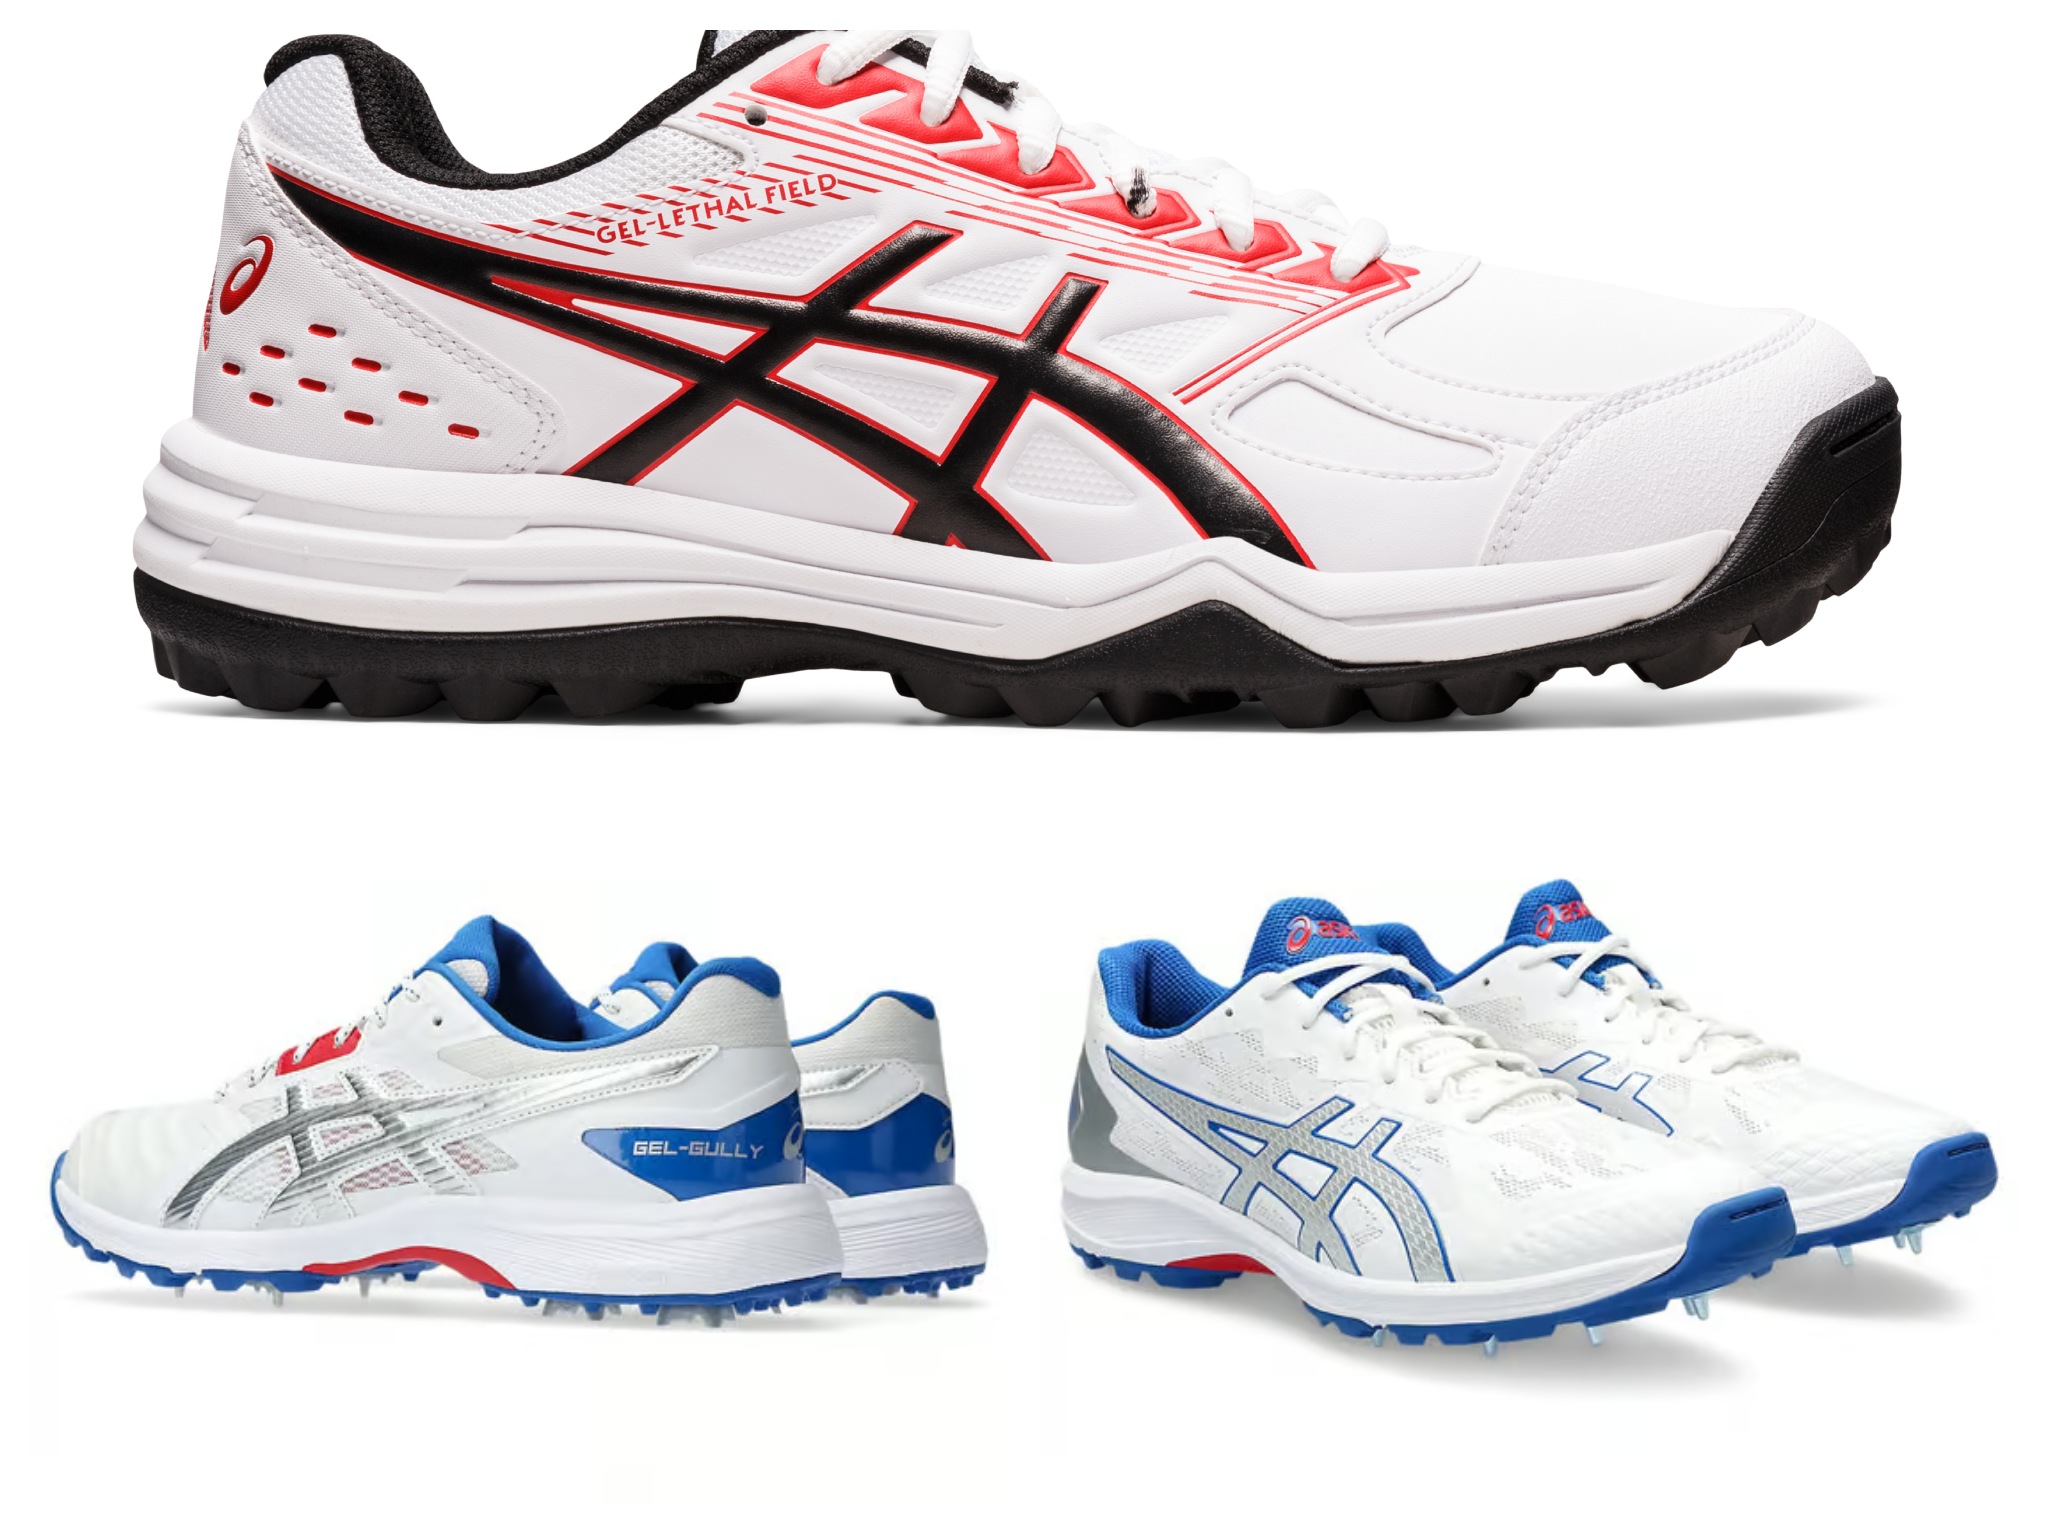 Sports wear brand ASICS steps up India focus